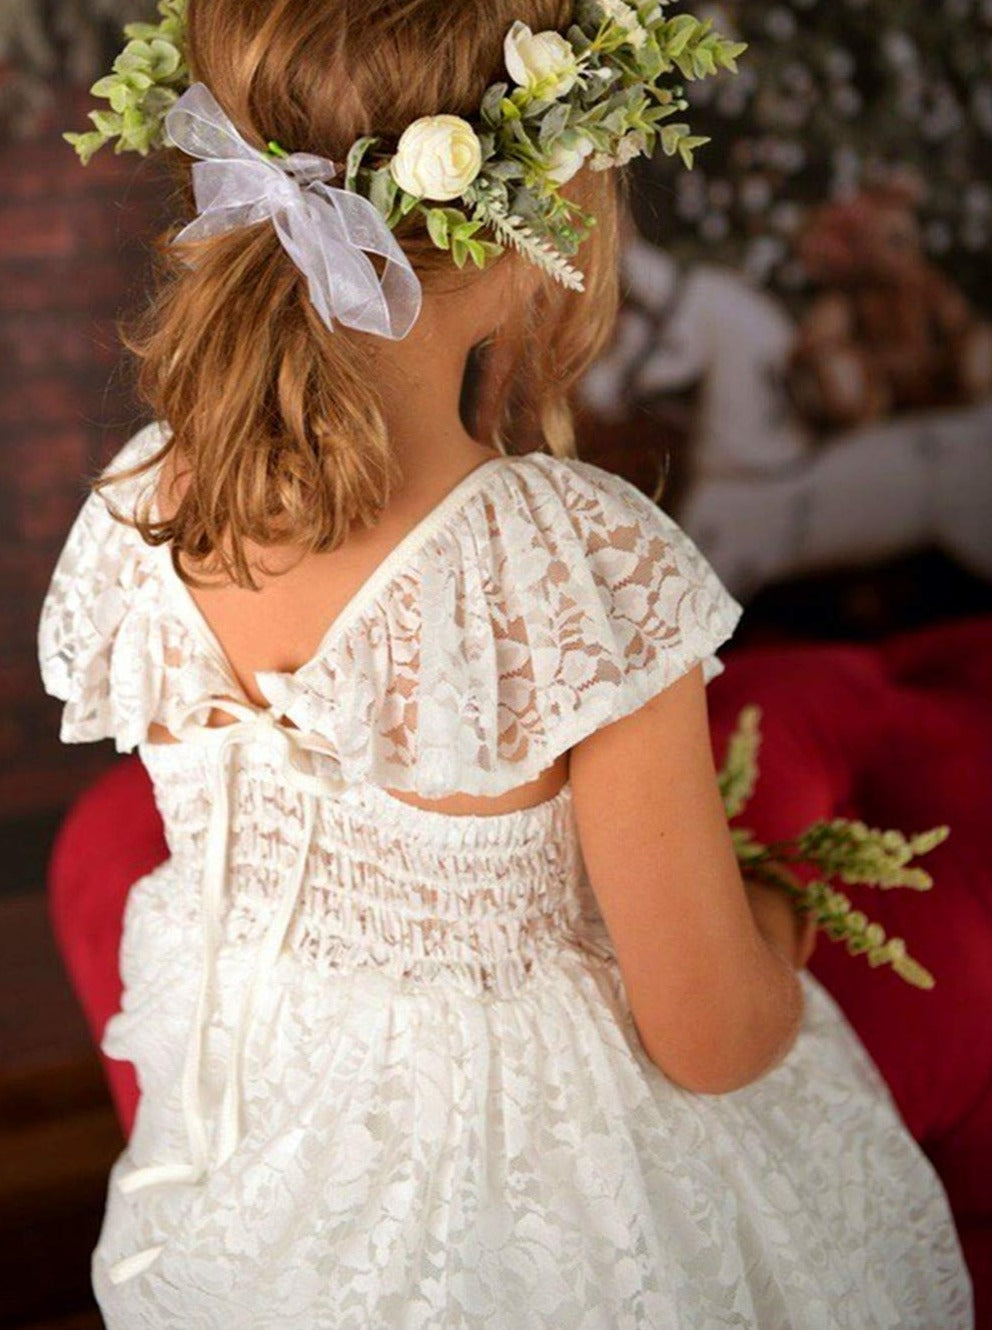 2 Bunnies Paisley All Lace Flower Girl Dress in White Off-Shoulder Tea-Length A-Line 5